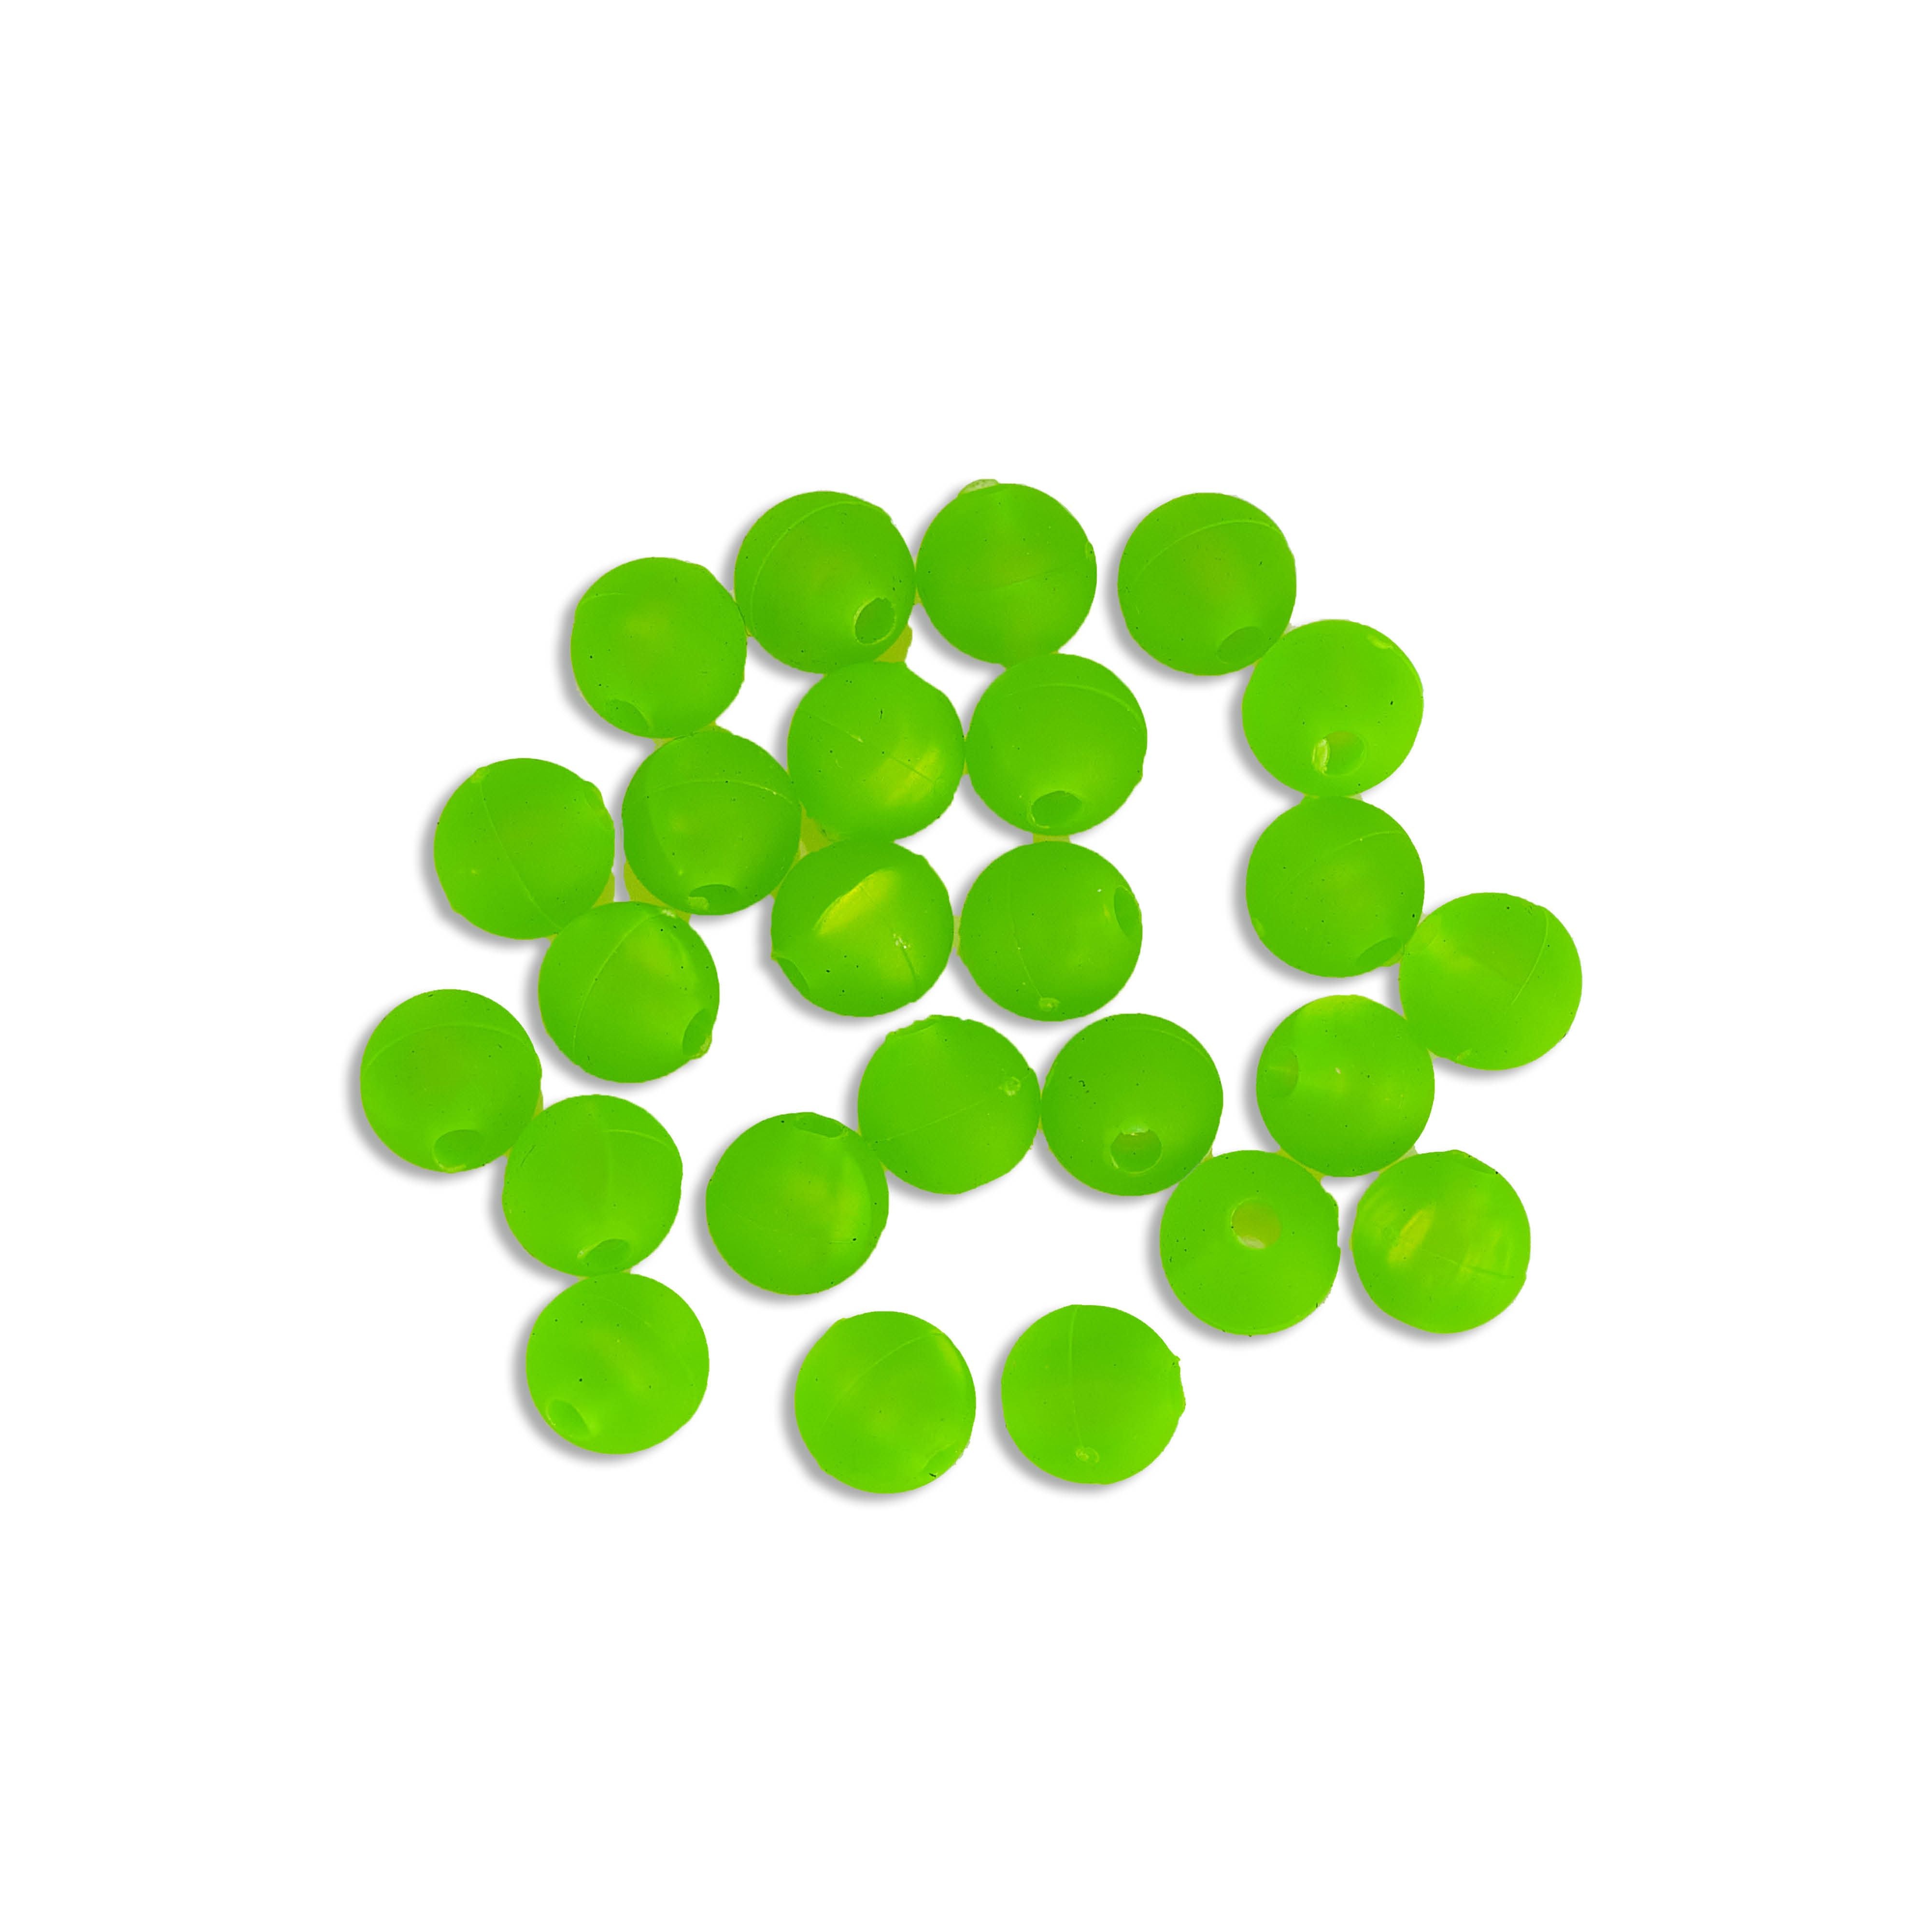 Slime Green  Frosted 6MM Beads (20pack)